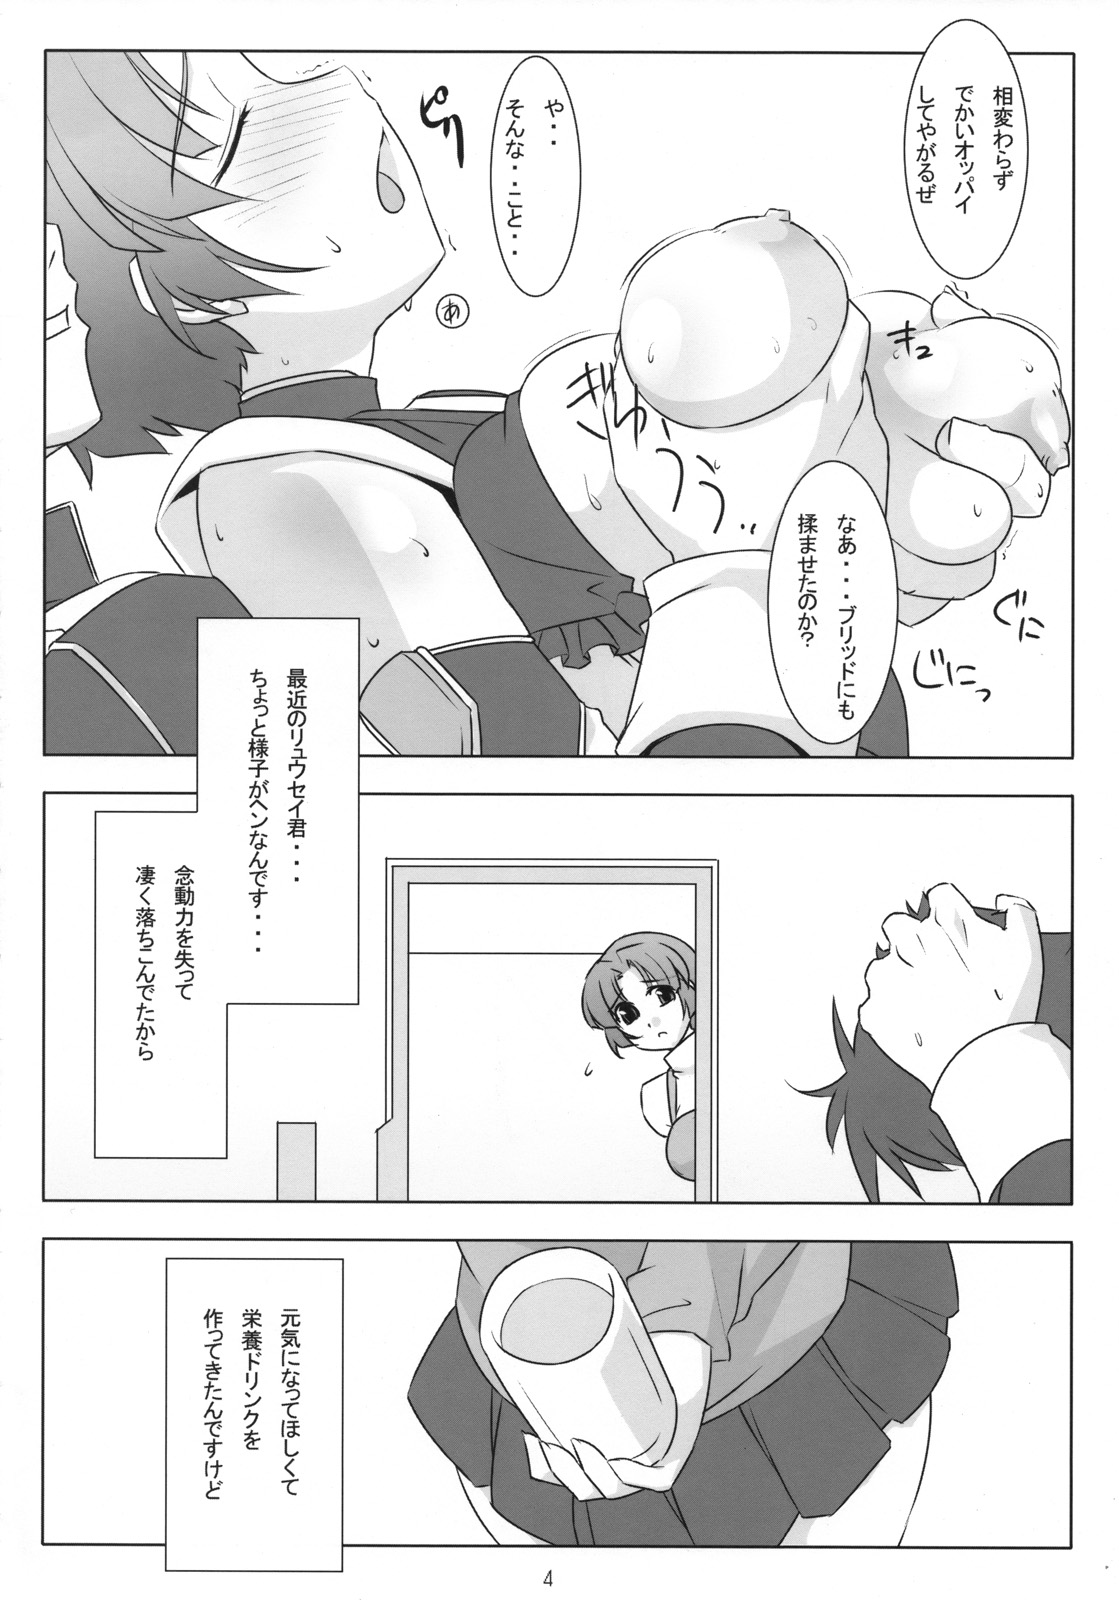 (C71) [NF121 (Midori Aoi)] CHEMICAL SOUP (Super Robot Wars) page 3 full